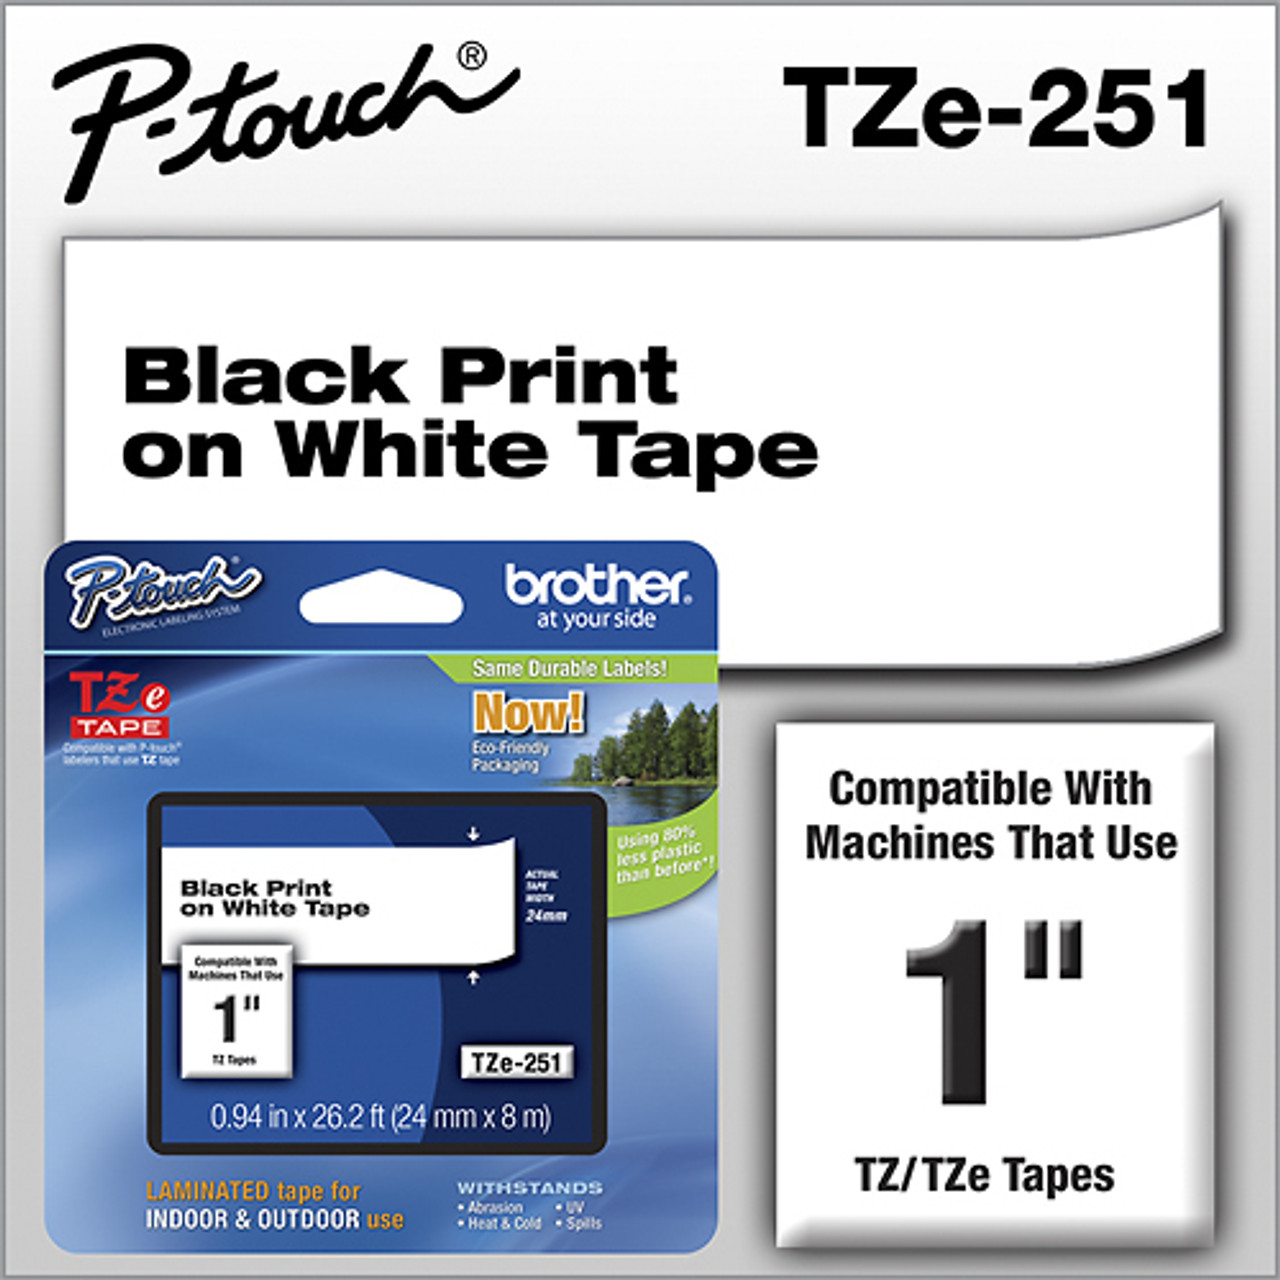 Brother - P-touch TZe251 ~1” (0.94") x 8m (26.2 ft.) Black on White Standard Laminated Tape - White